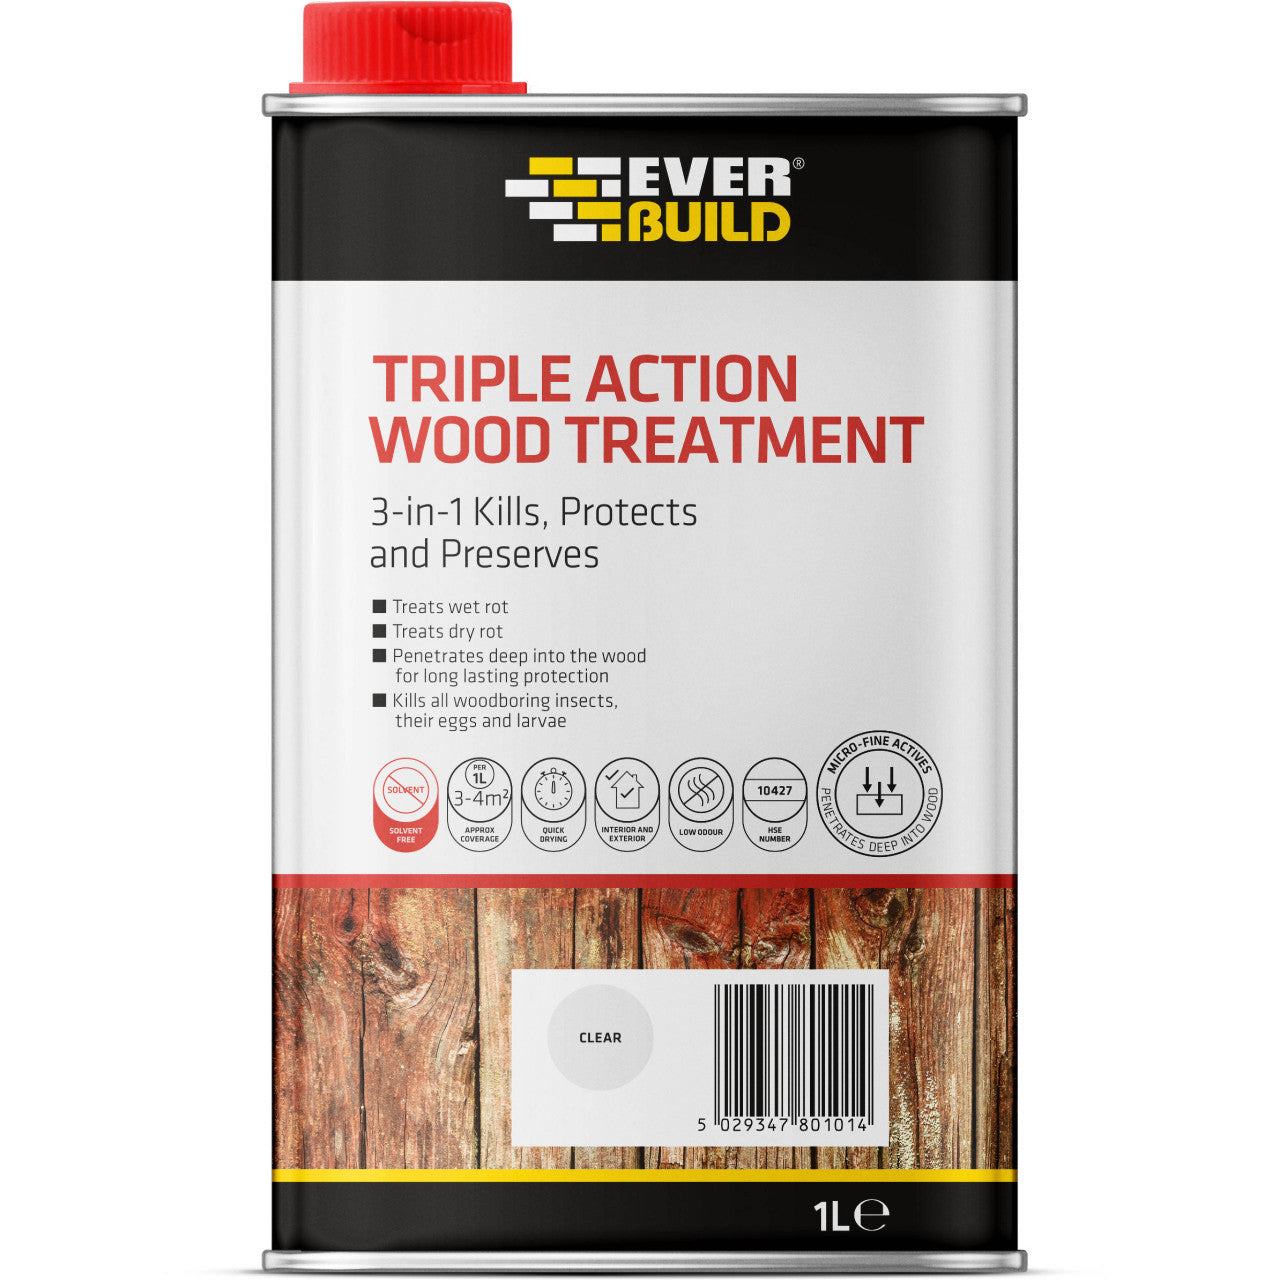 Everbuild Triple Action (Kills, Protects and Preserves) Wood Treatment, Clear, 1 Litre